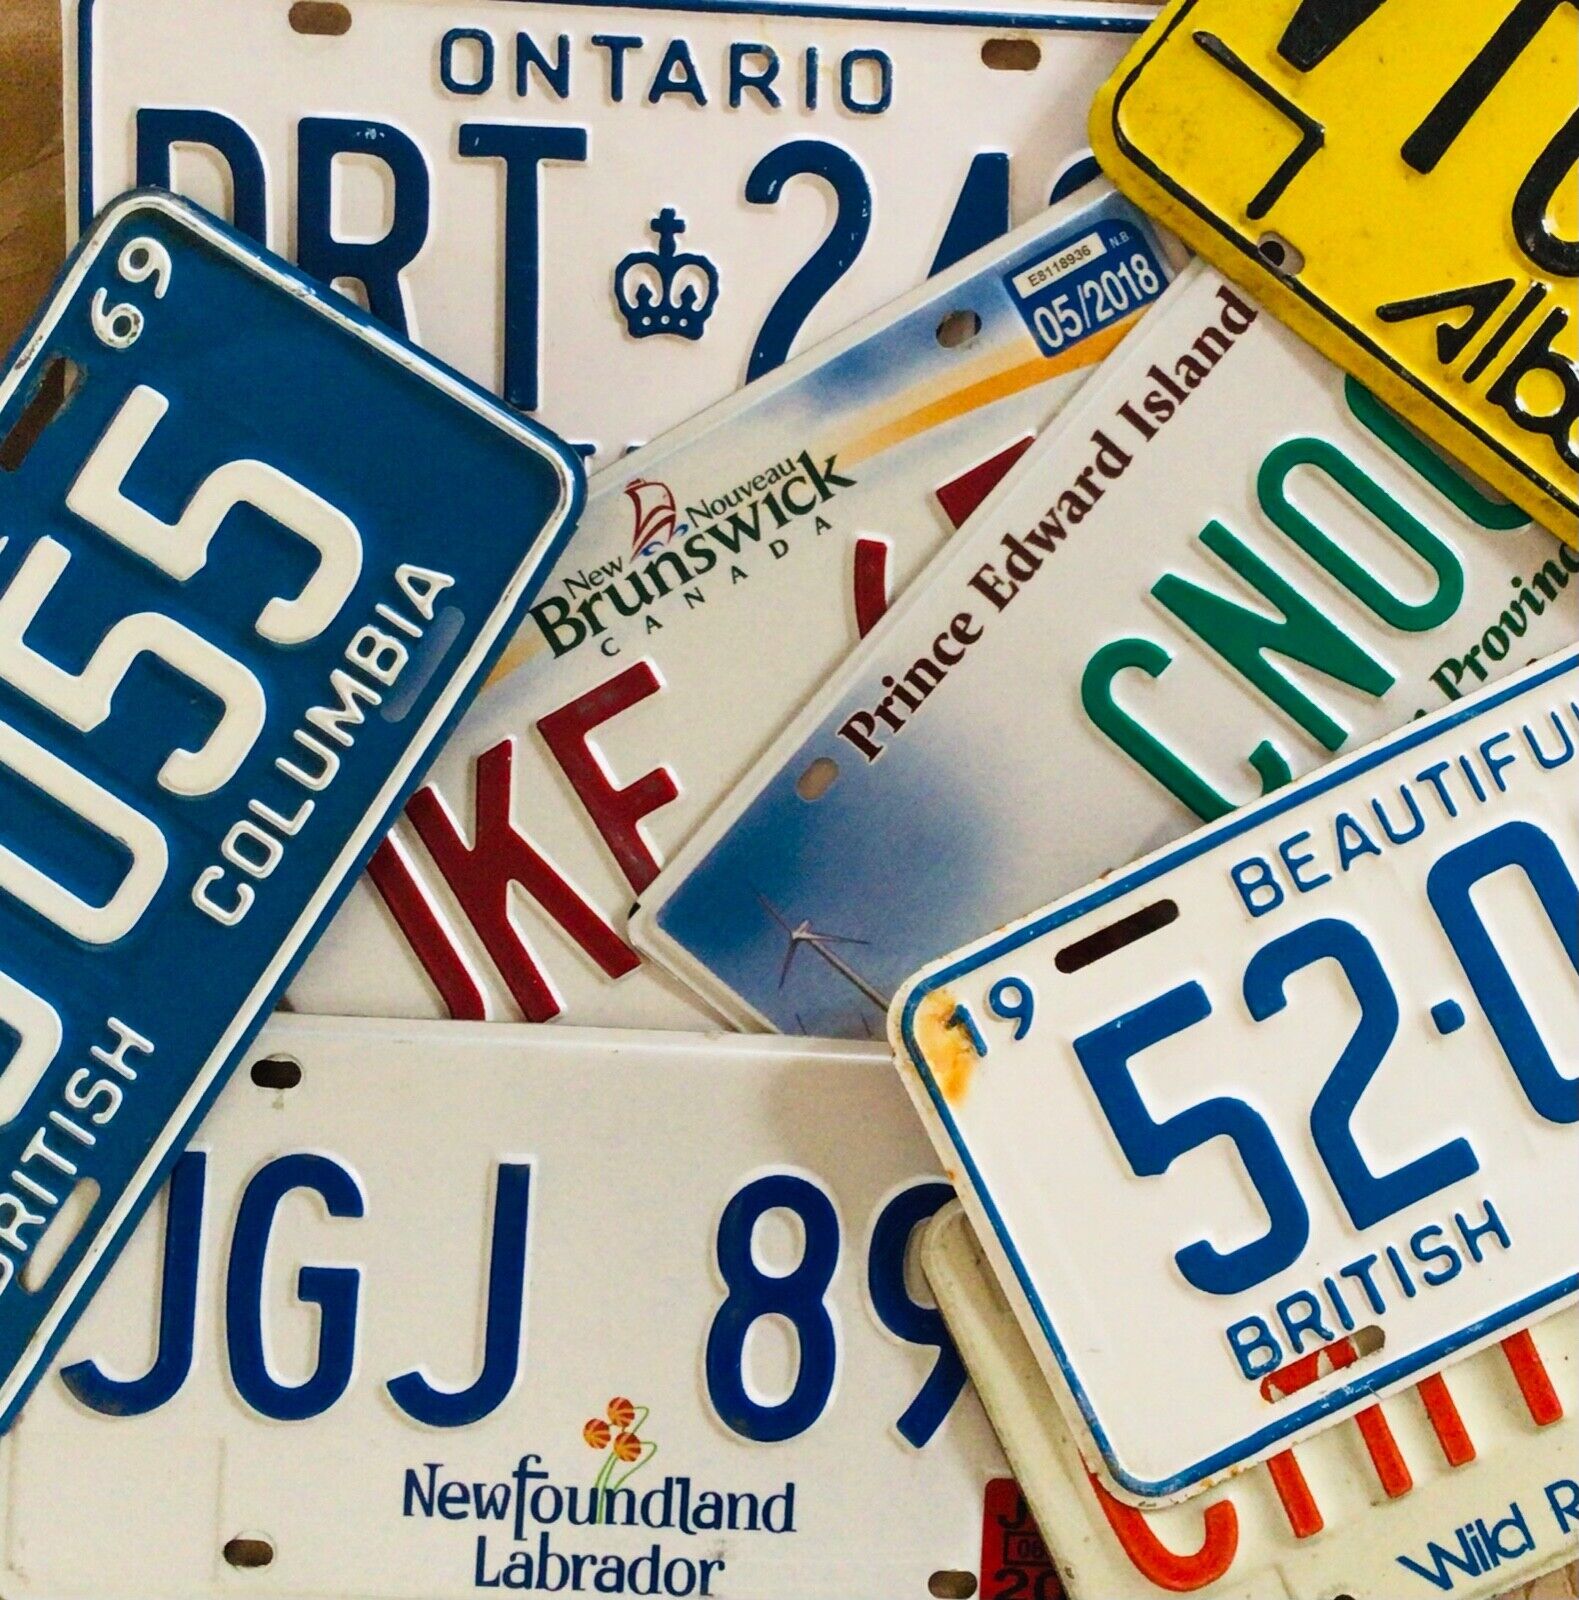 Canada License Plates - Most Canadian Provinces - Pick One - PEI, NB, NF, AB, BC